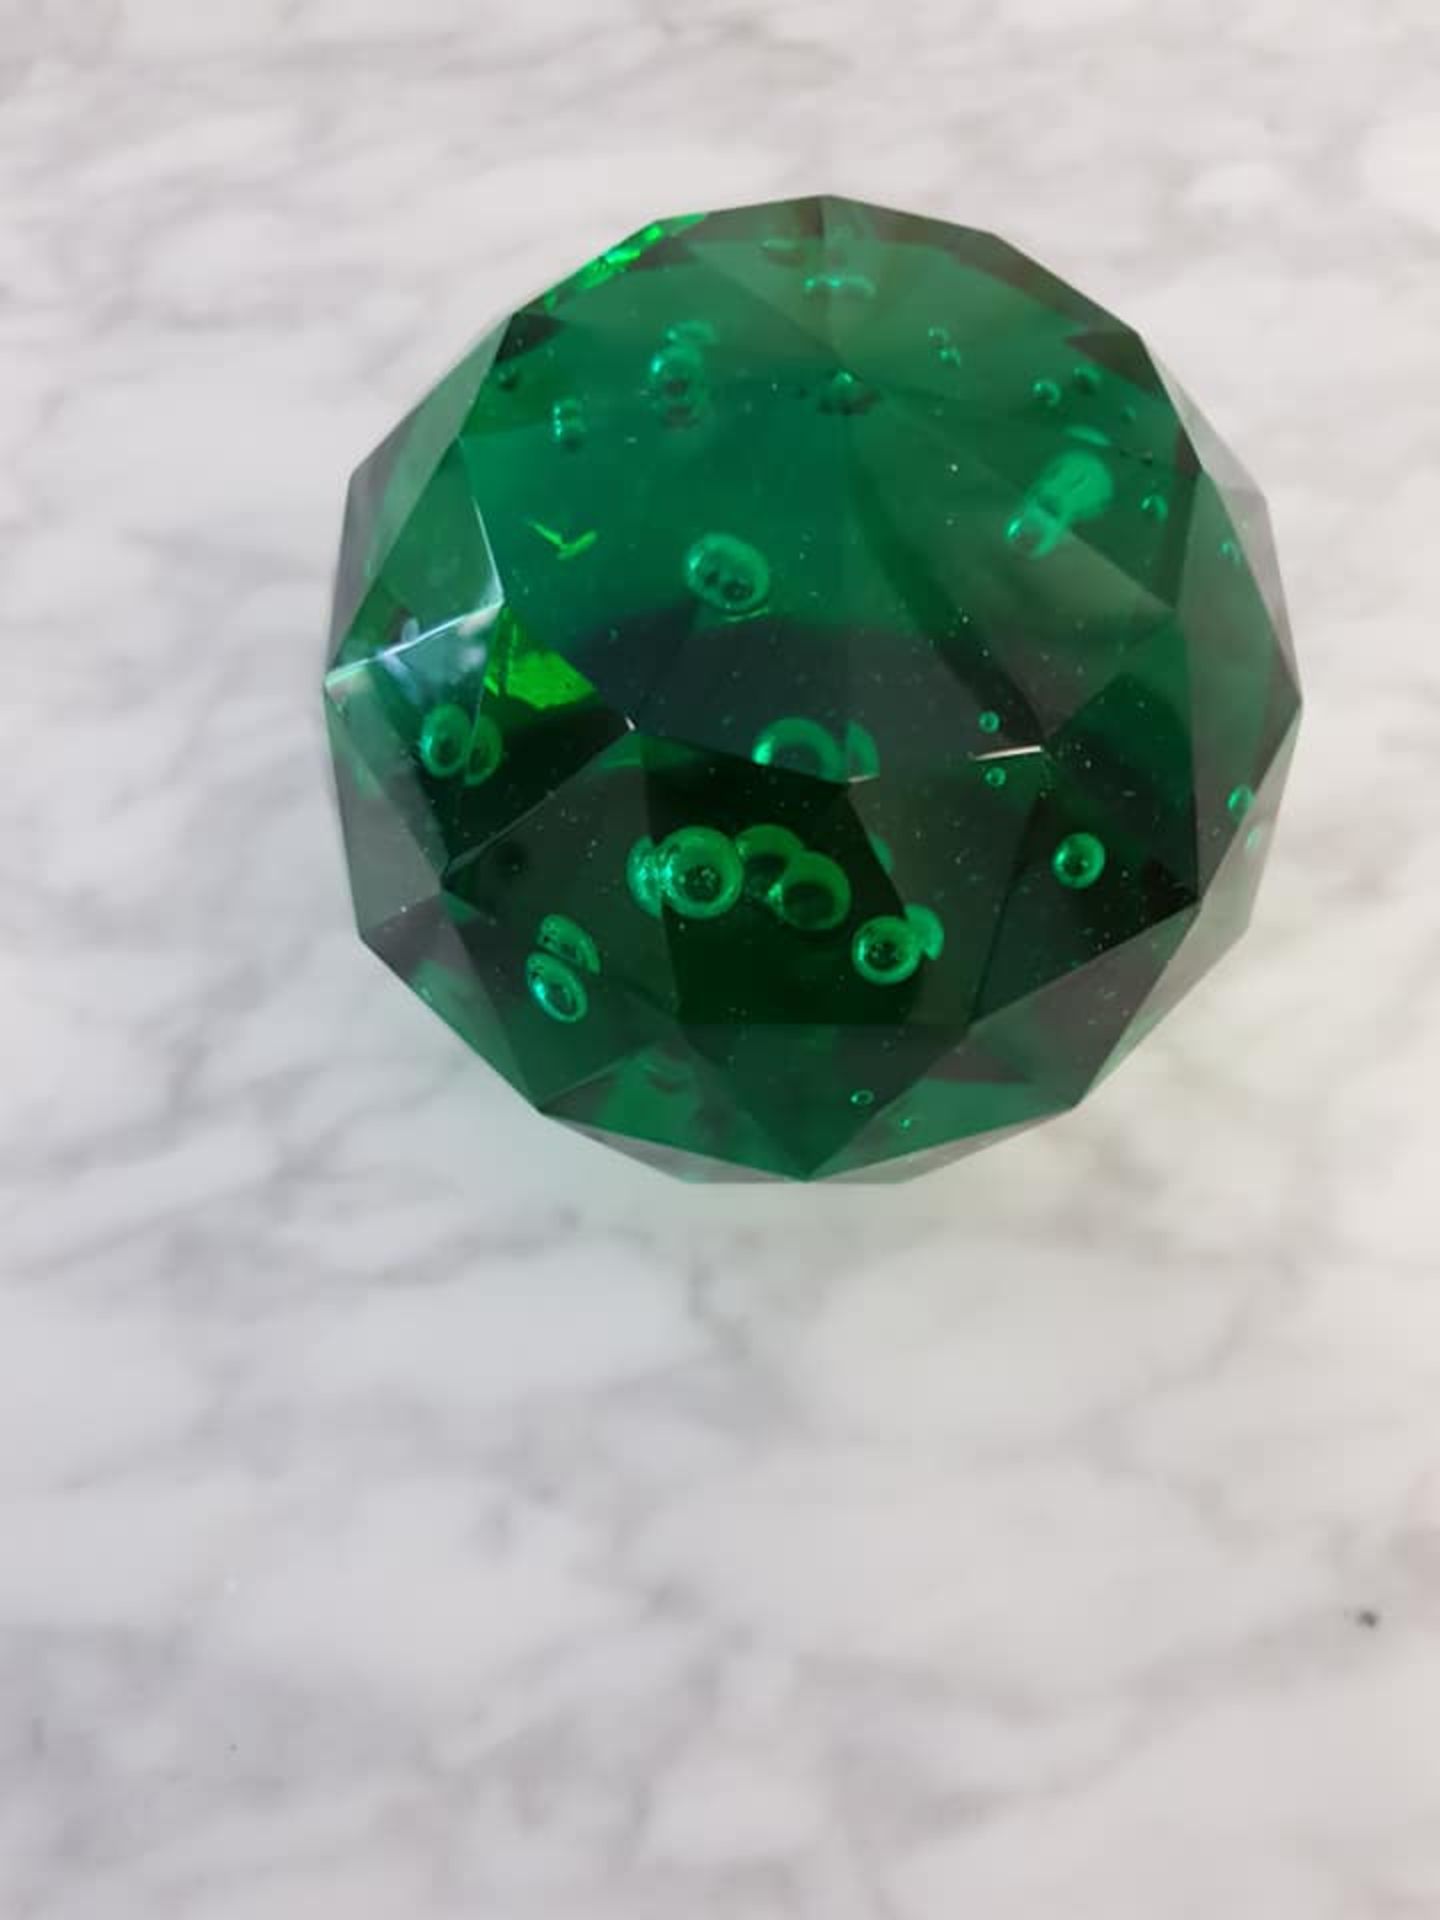 Bohemian blown art glass cut paperweight 11cm emerald green with controlled bubbles design